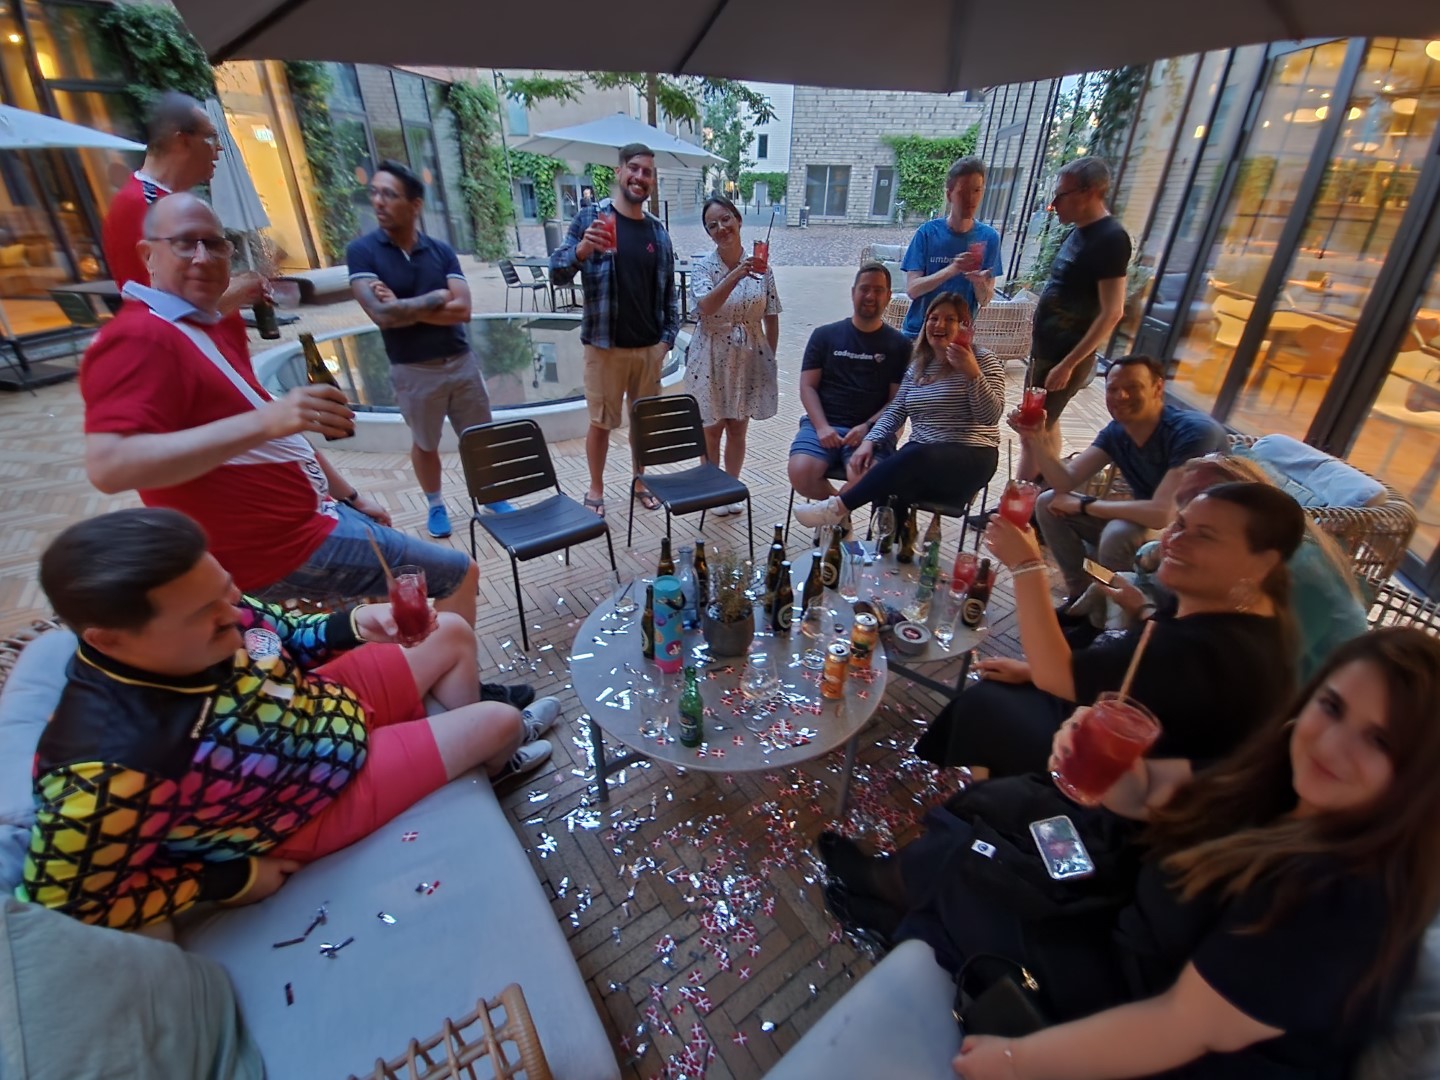 A group of people sitting at a small table outside the hotel with additional guests, confetti, and drinks.